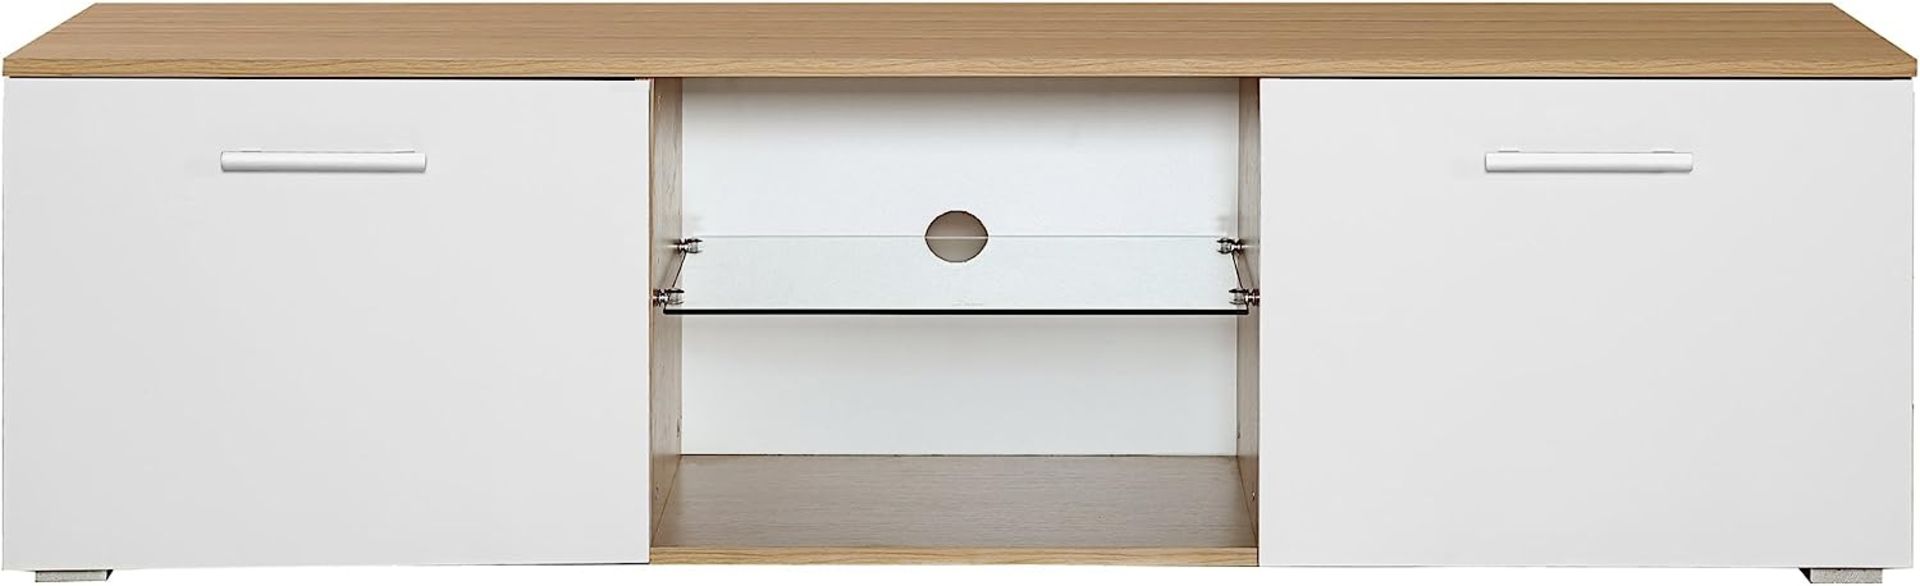 10 X BRAND NEW HARMIN MODERN 160CM TV STAND CABINET UNIT WITH HIGH GLOSS DOORS (WHITE ON OAK) - Image 4 of 9